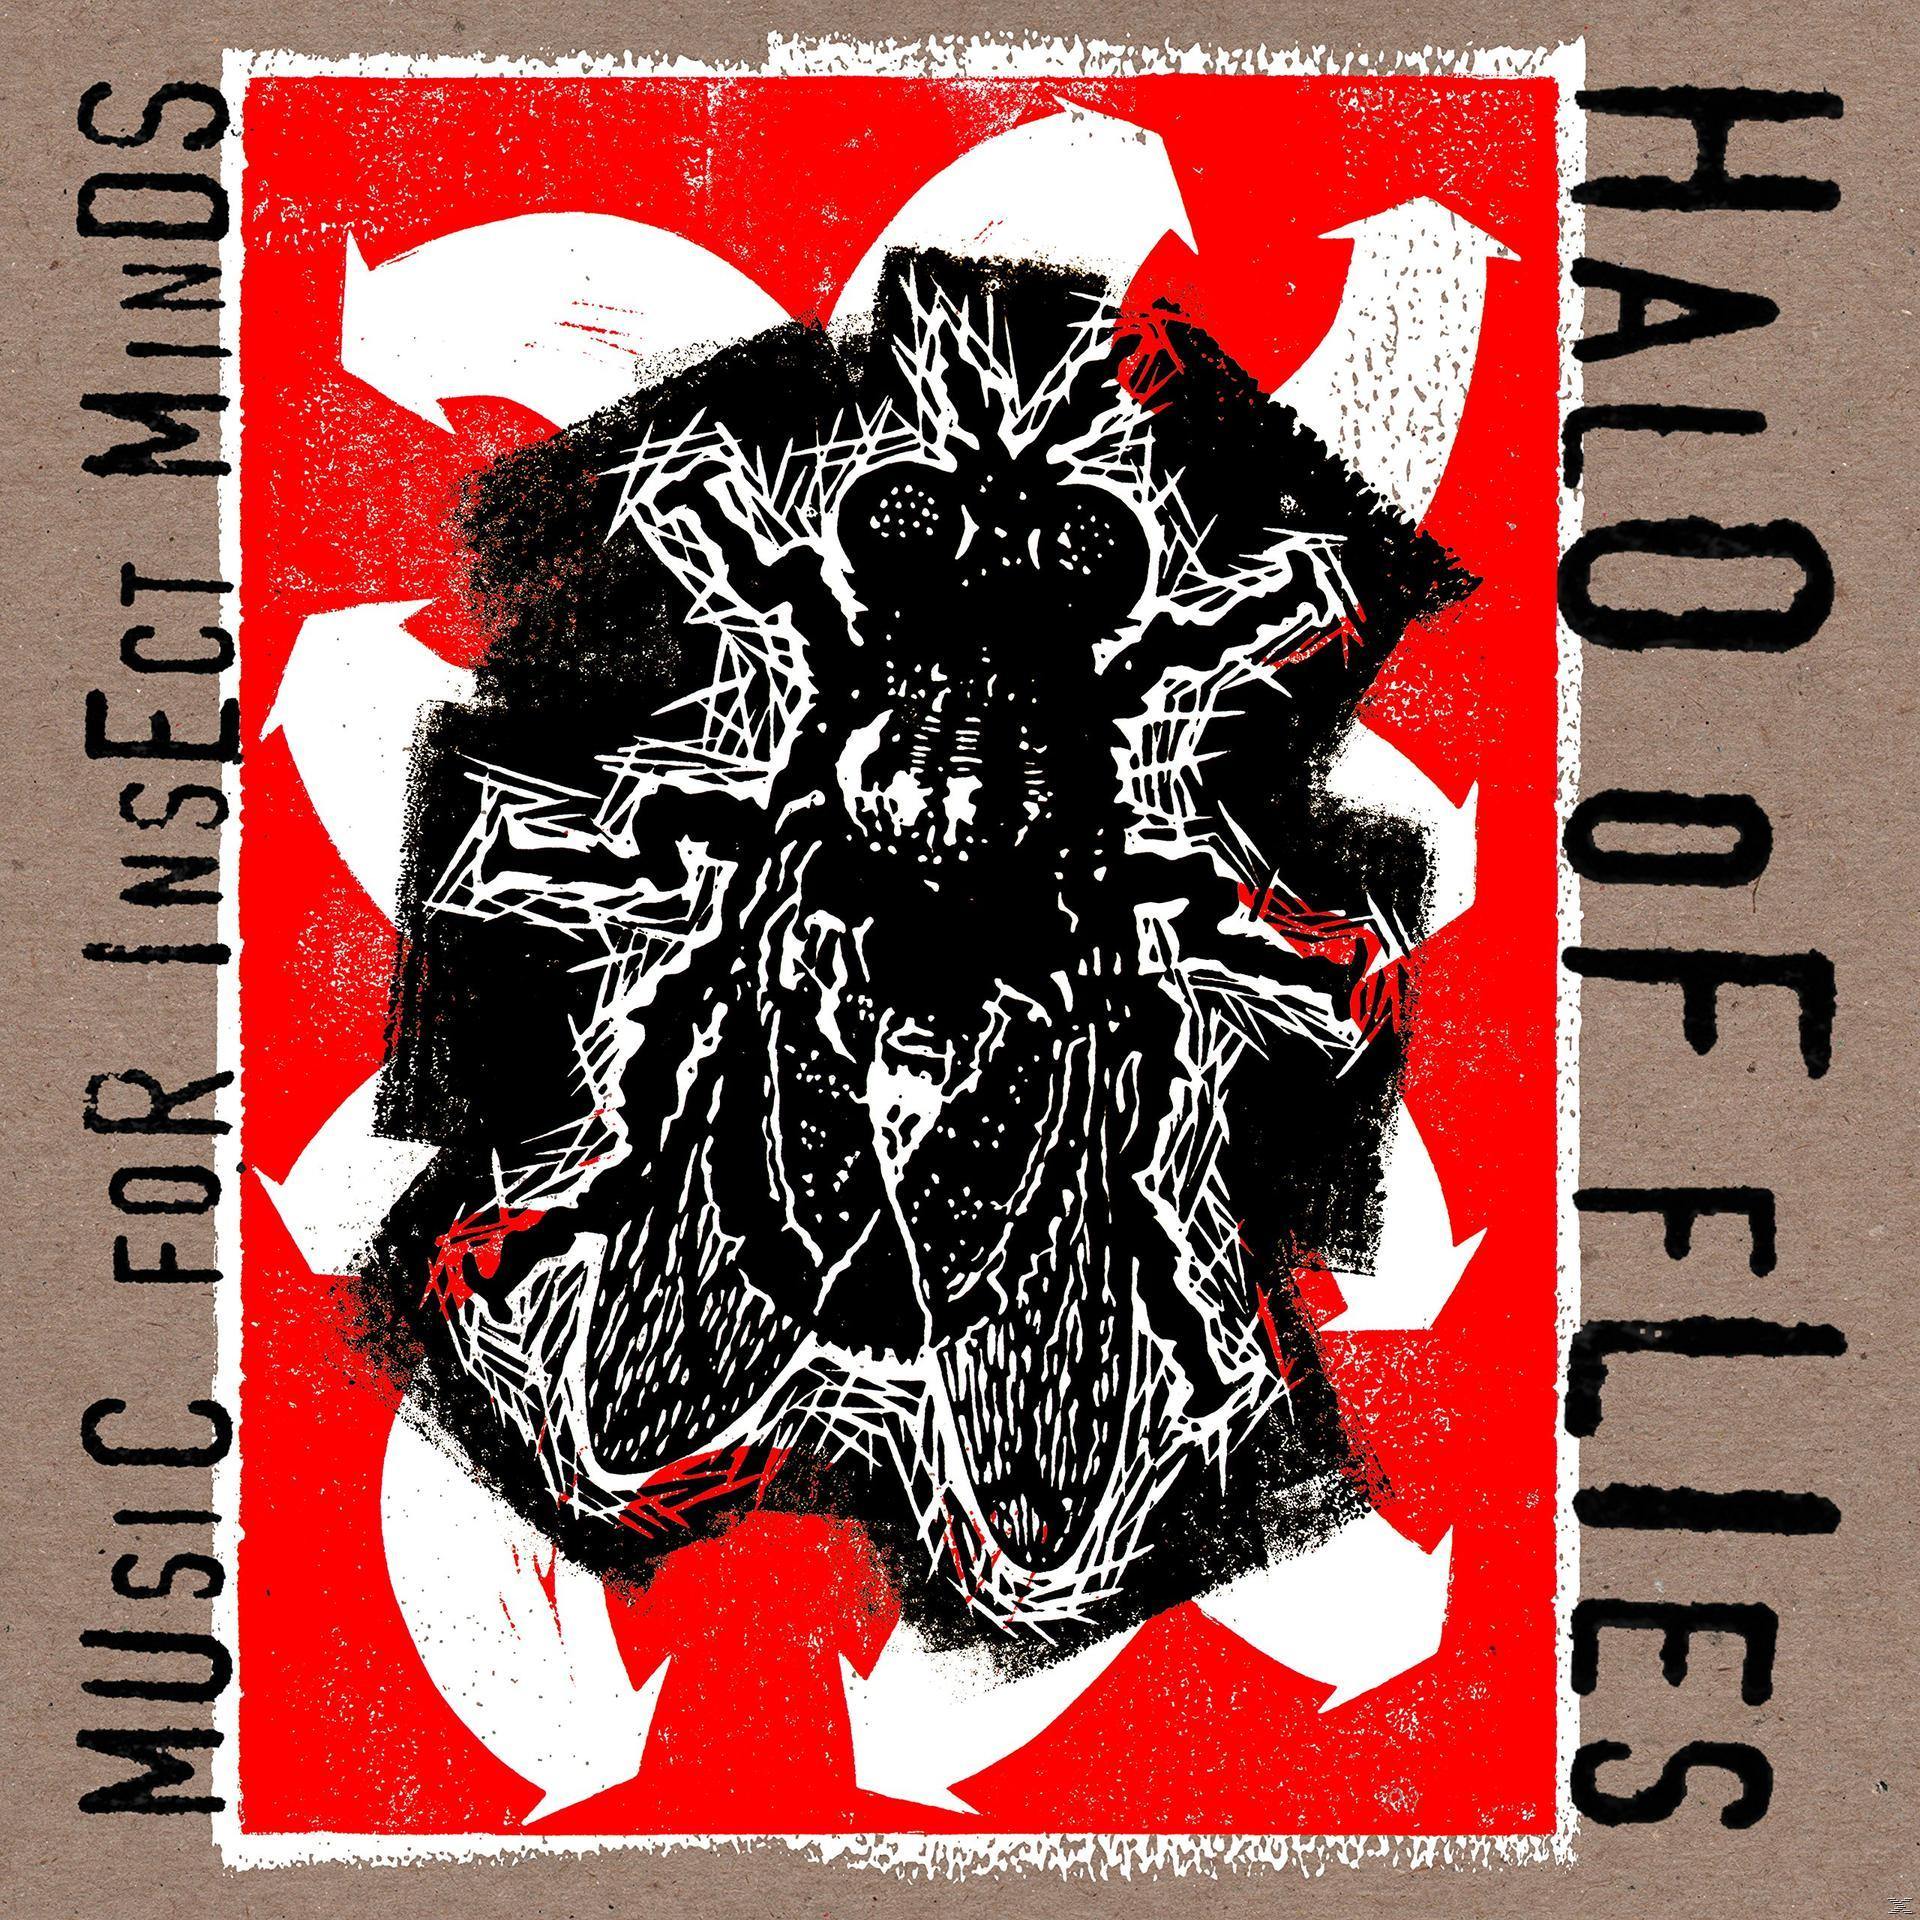 Insect Flies - Halo For Music Of Minds - (Vinyl)